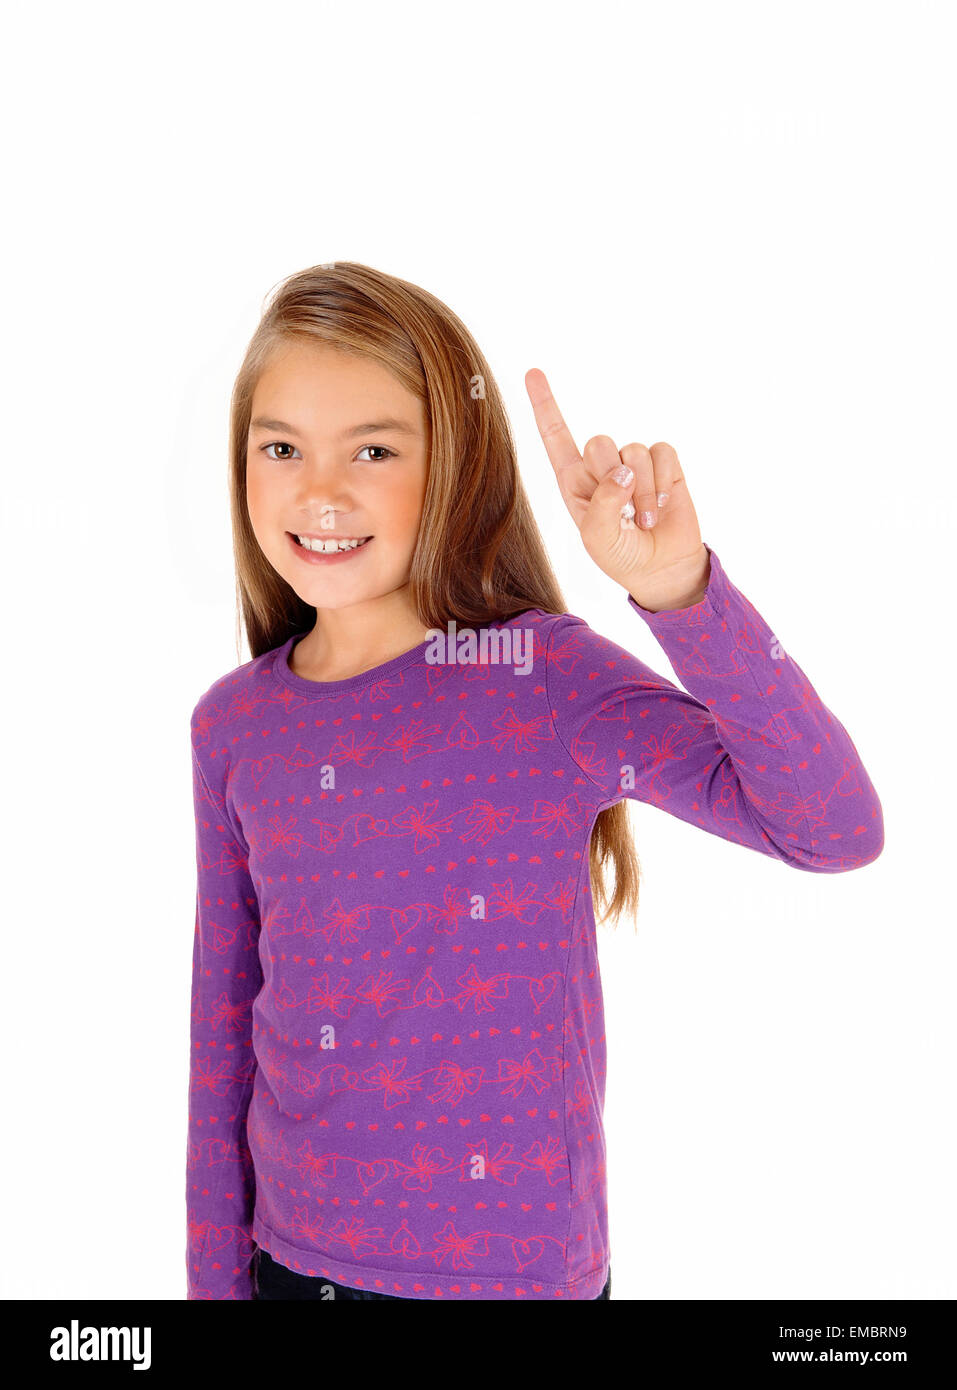 A lovely young blond girl pointing with her finger up, telling the teacher know something, isolated on white background. Stock Photo